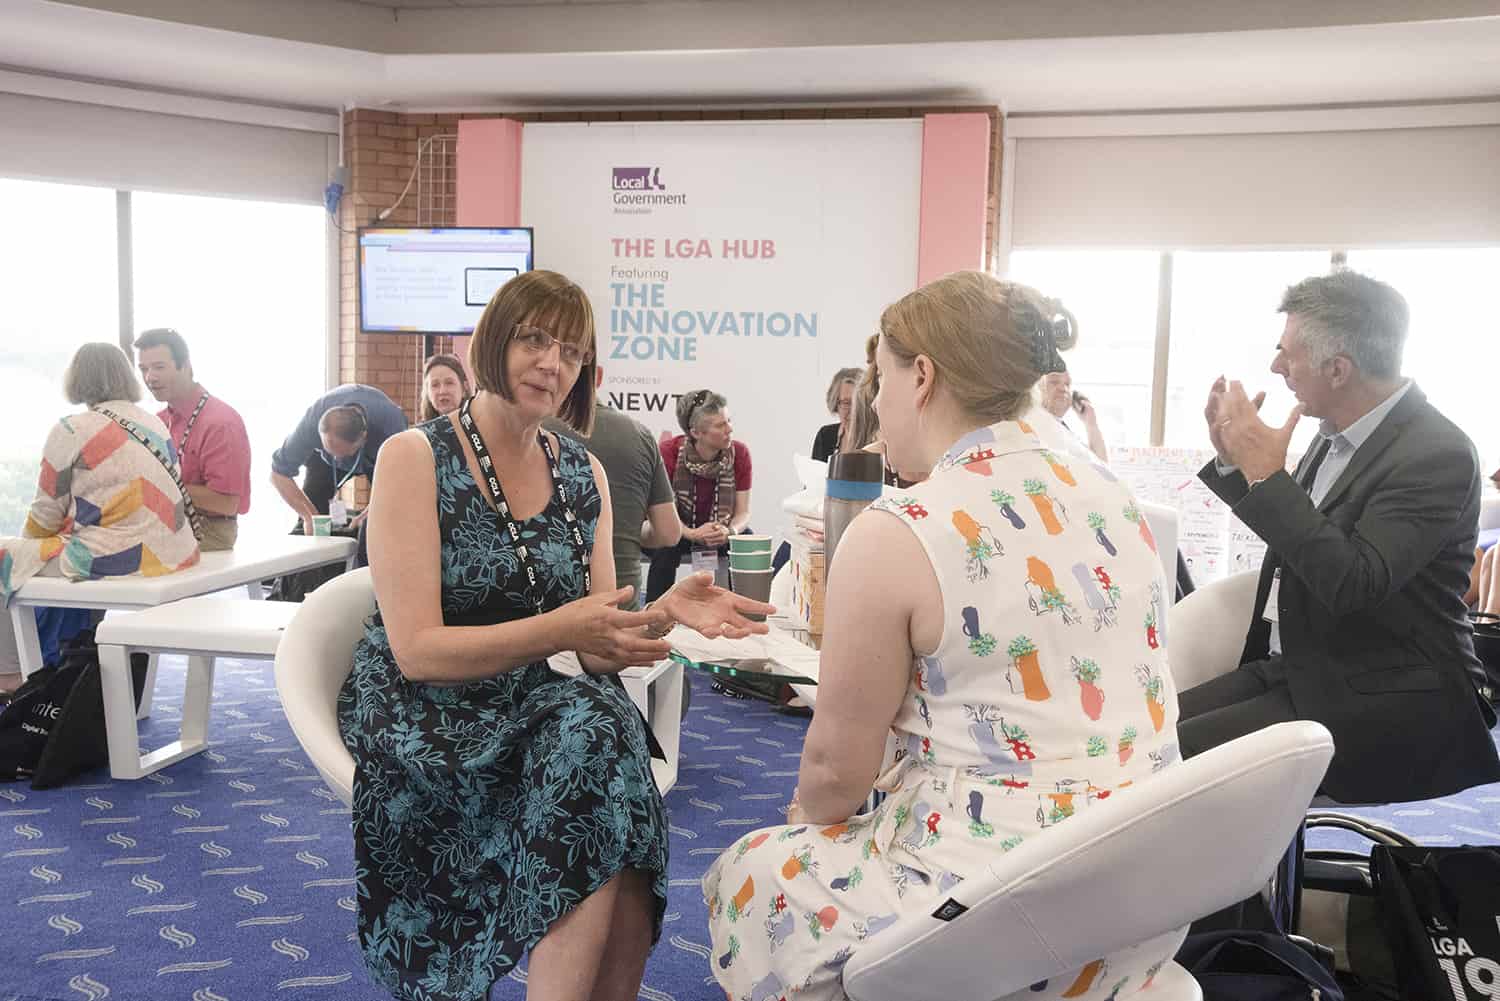 Female delegates talking to each other in Innovation Zone at LGA Conference